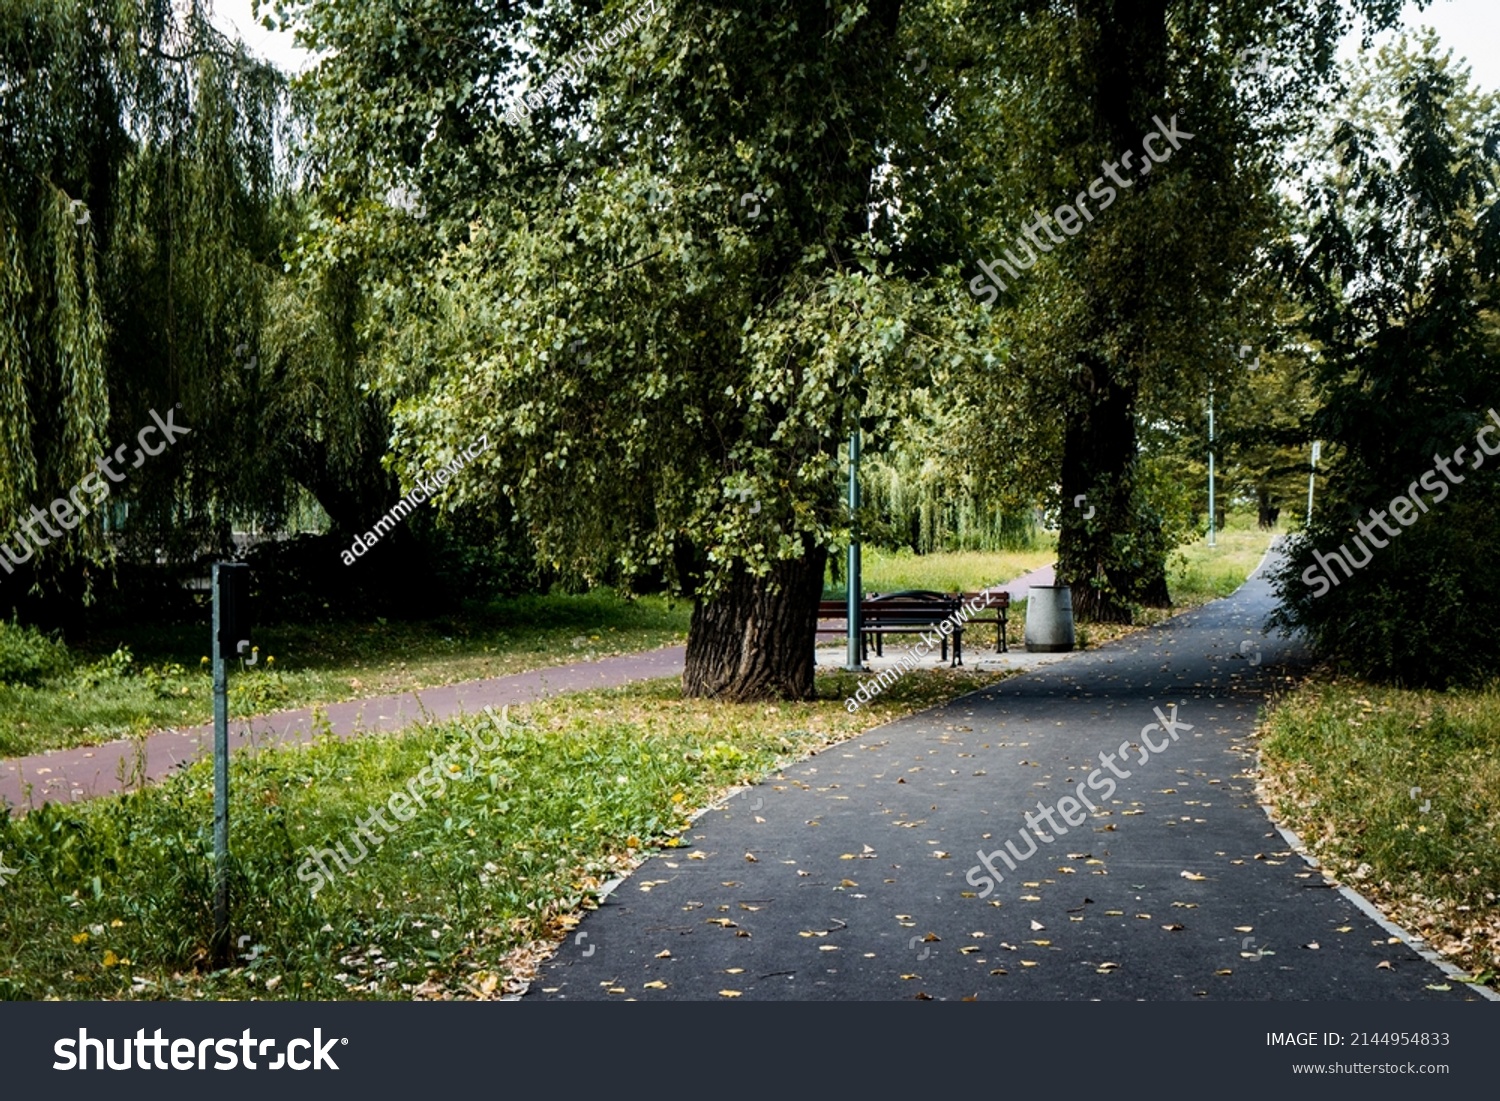 Asphalt footpath and bicycle path surrounded by lawn and trees at the city park #2144954833